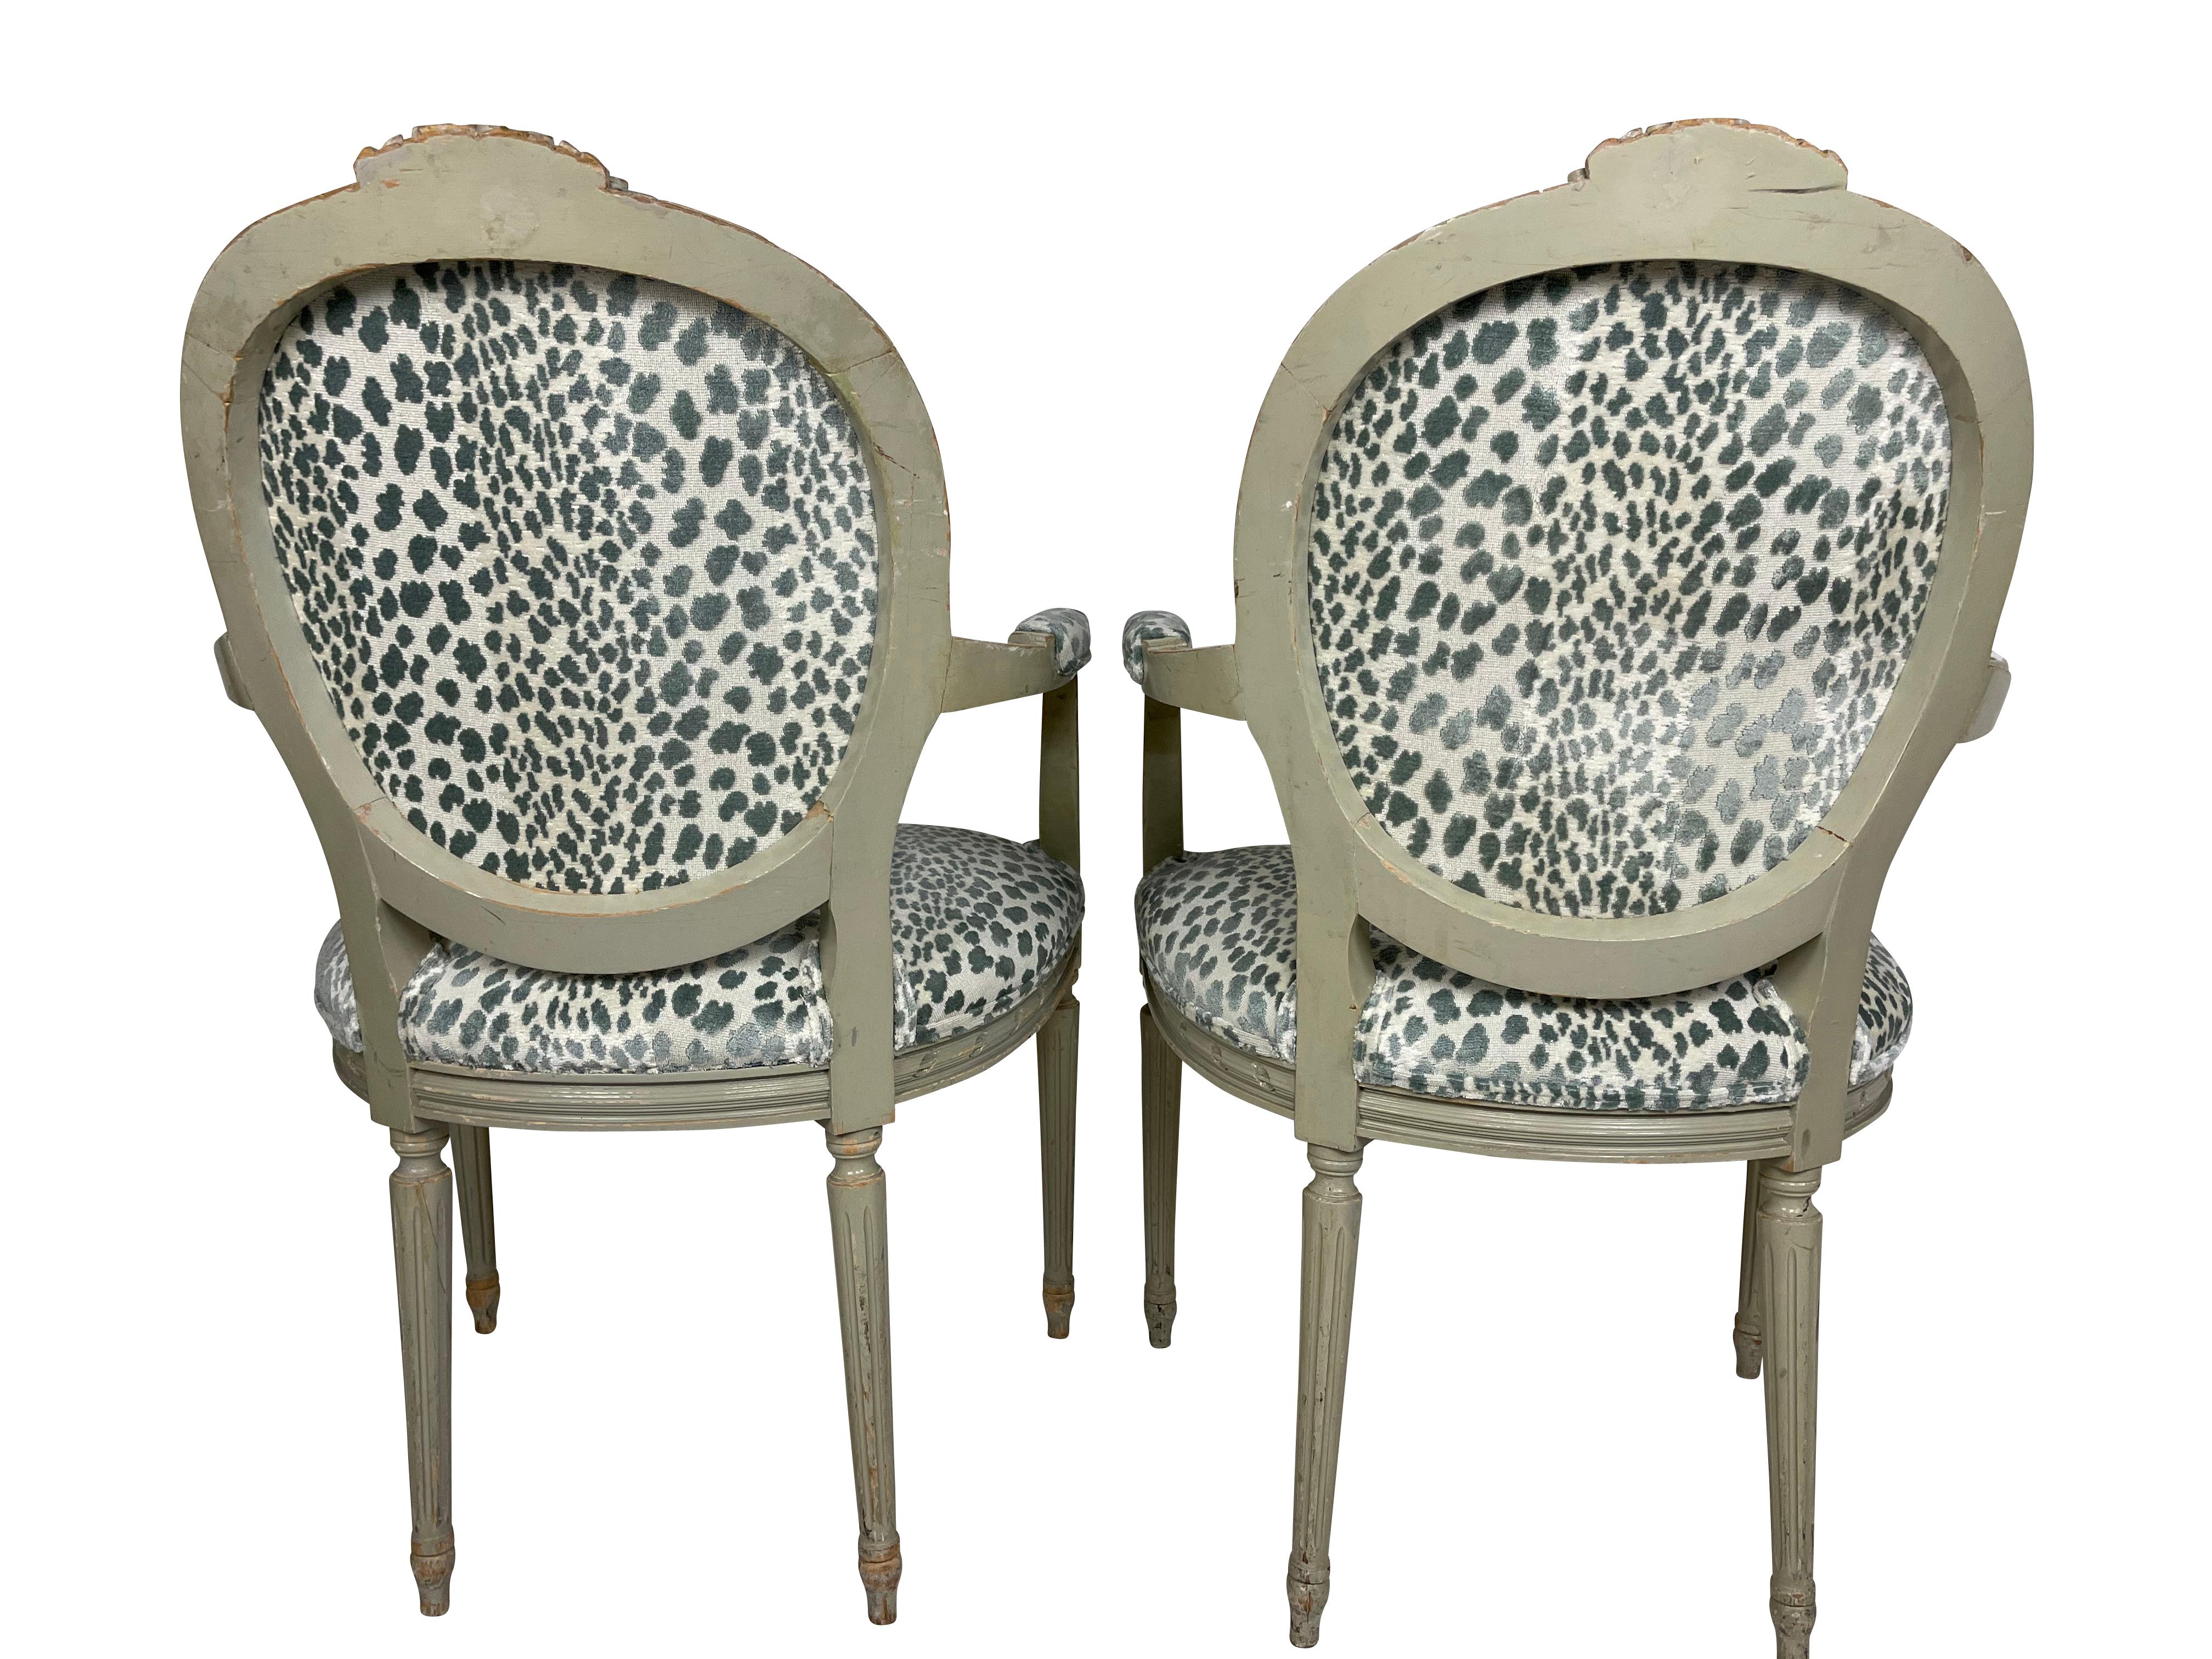 Pair of Louis XVI Style Chairs Blue/Green Animal Print Velvet Fabric In Good Condition For Sale In Essex, MA